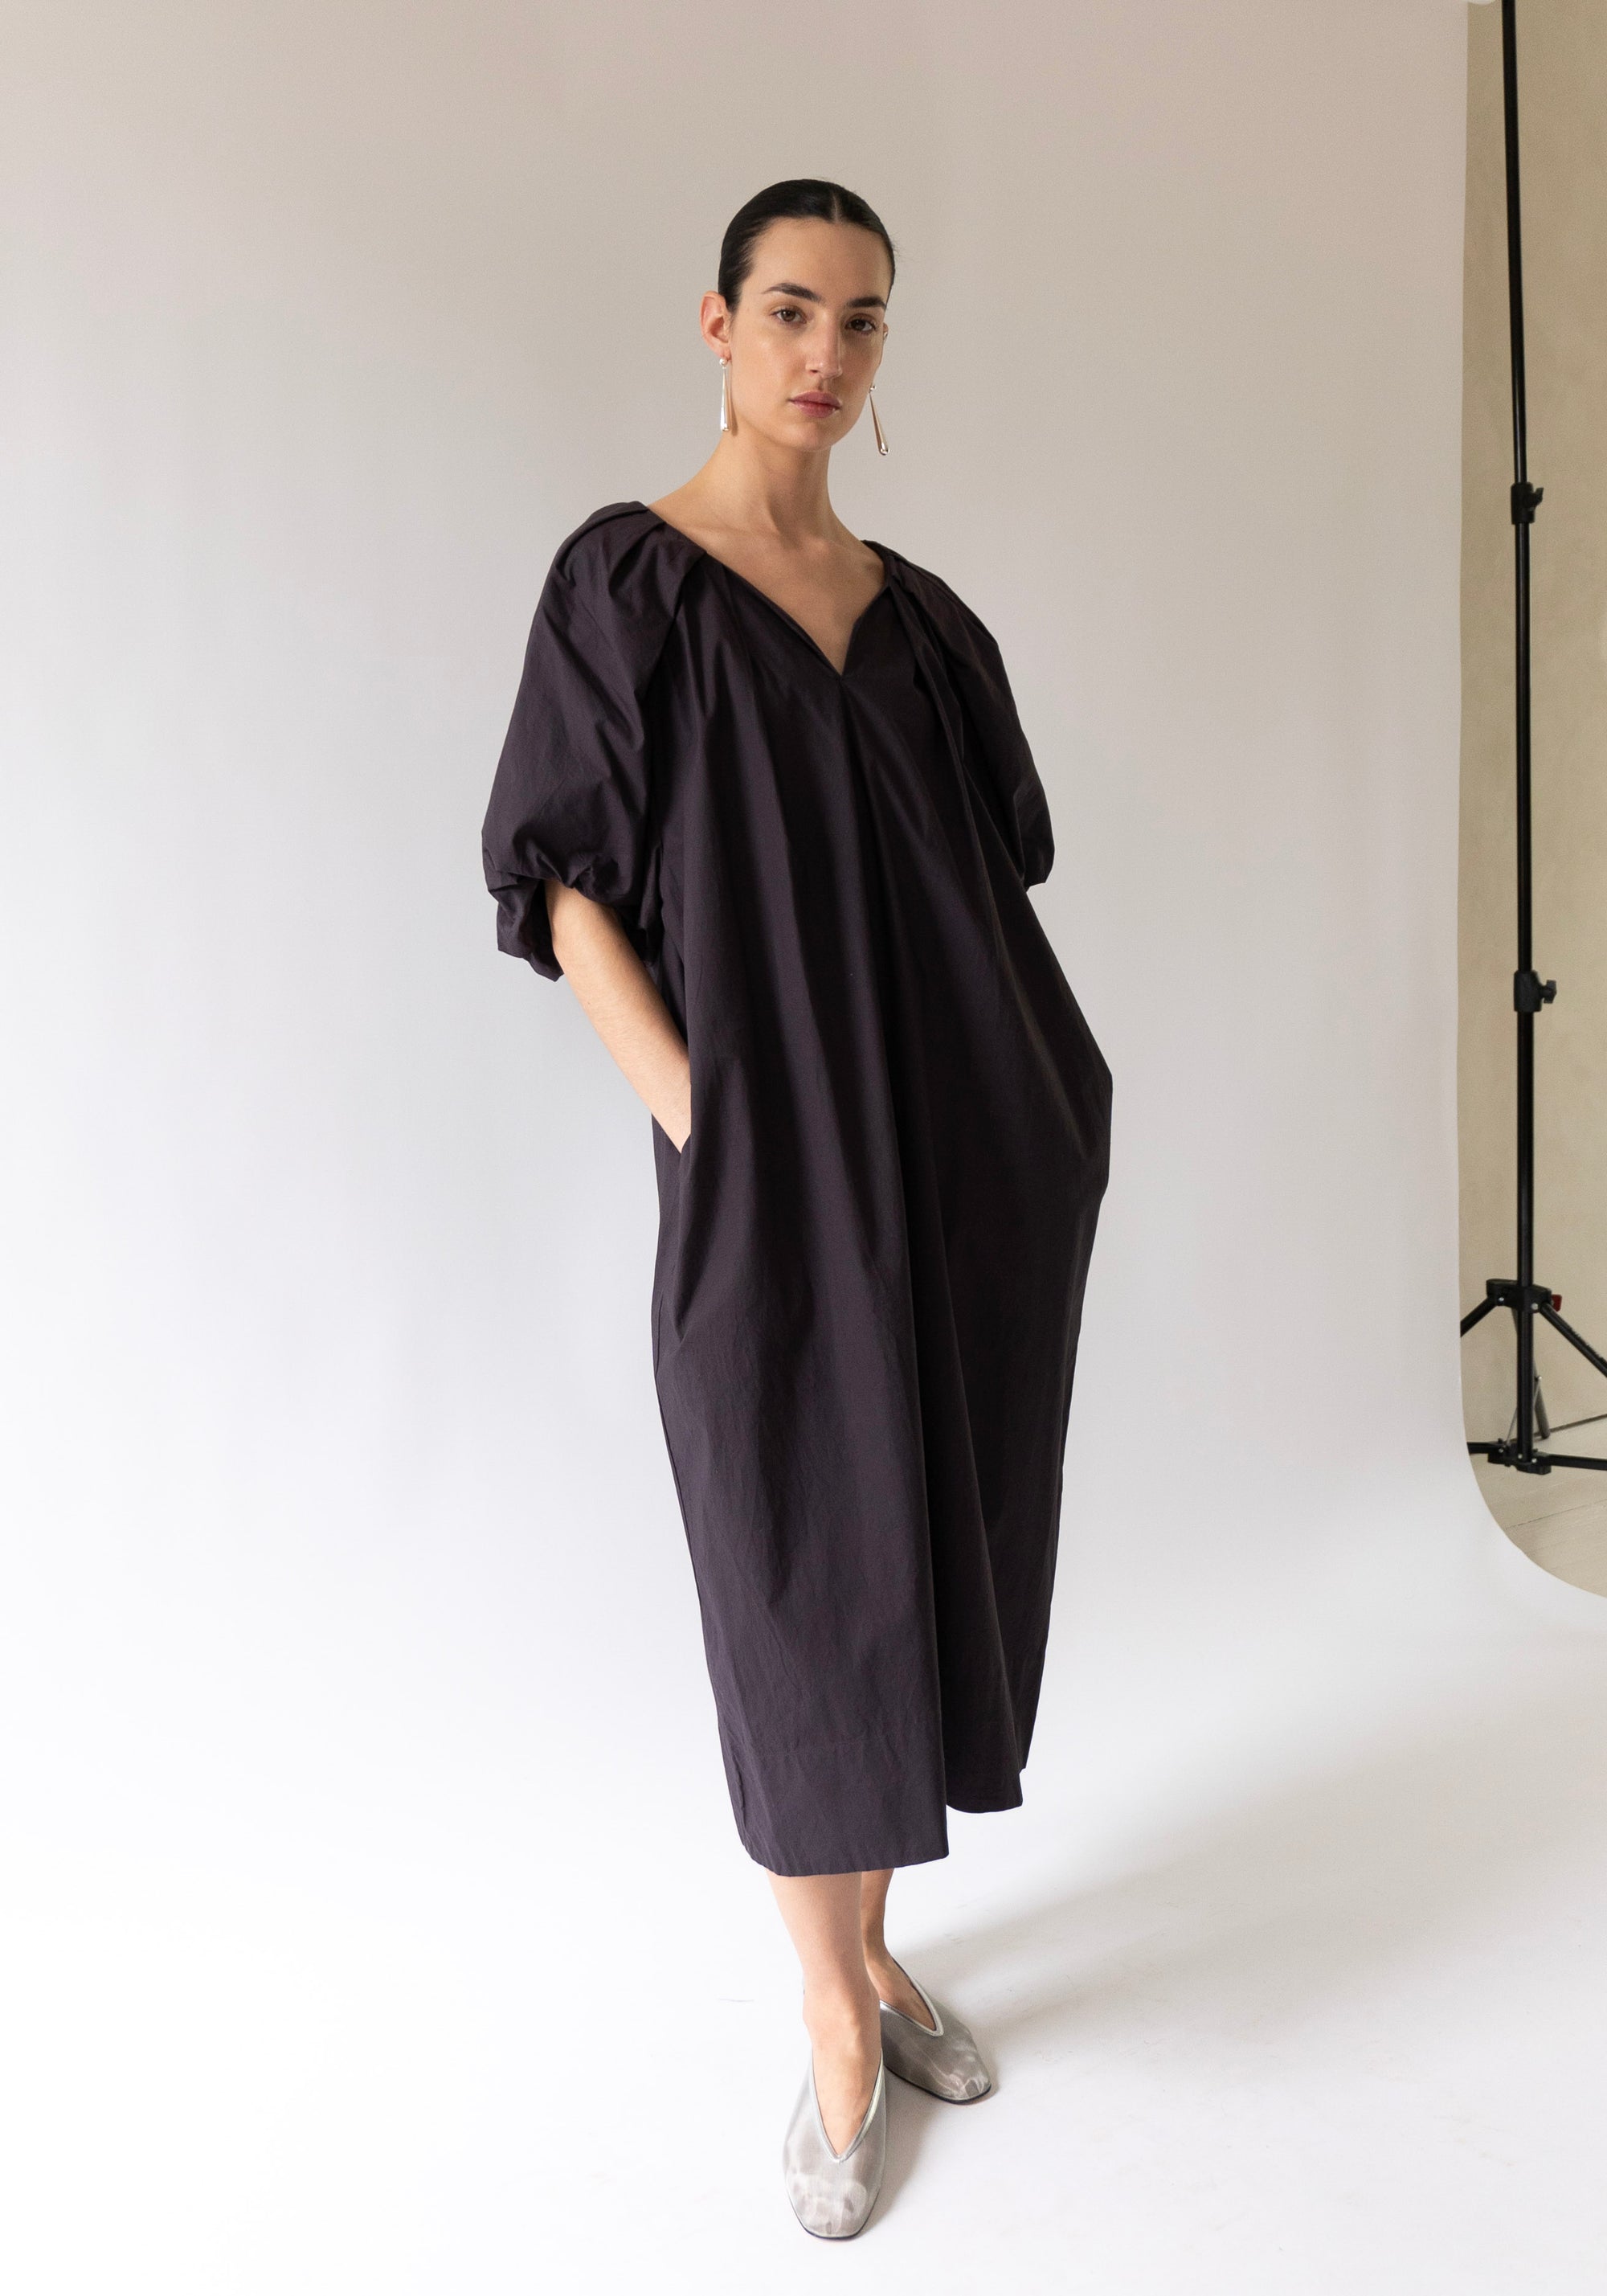 Tucked Cocoon Dress in Eggplant